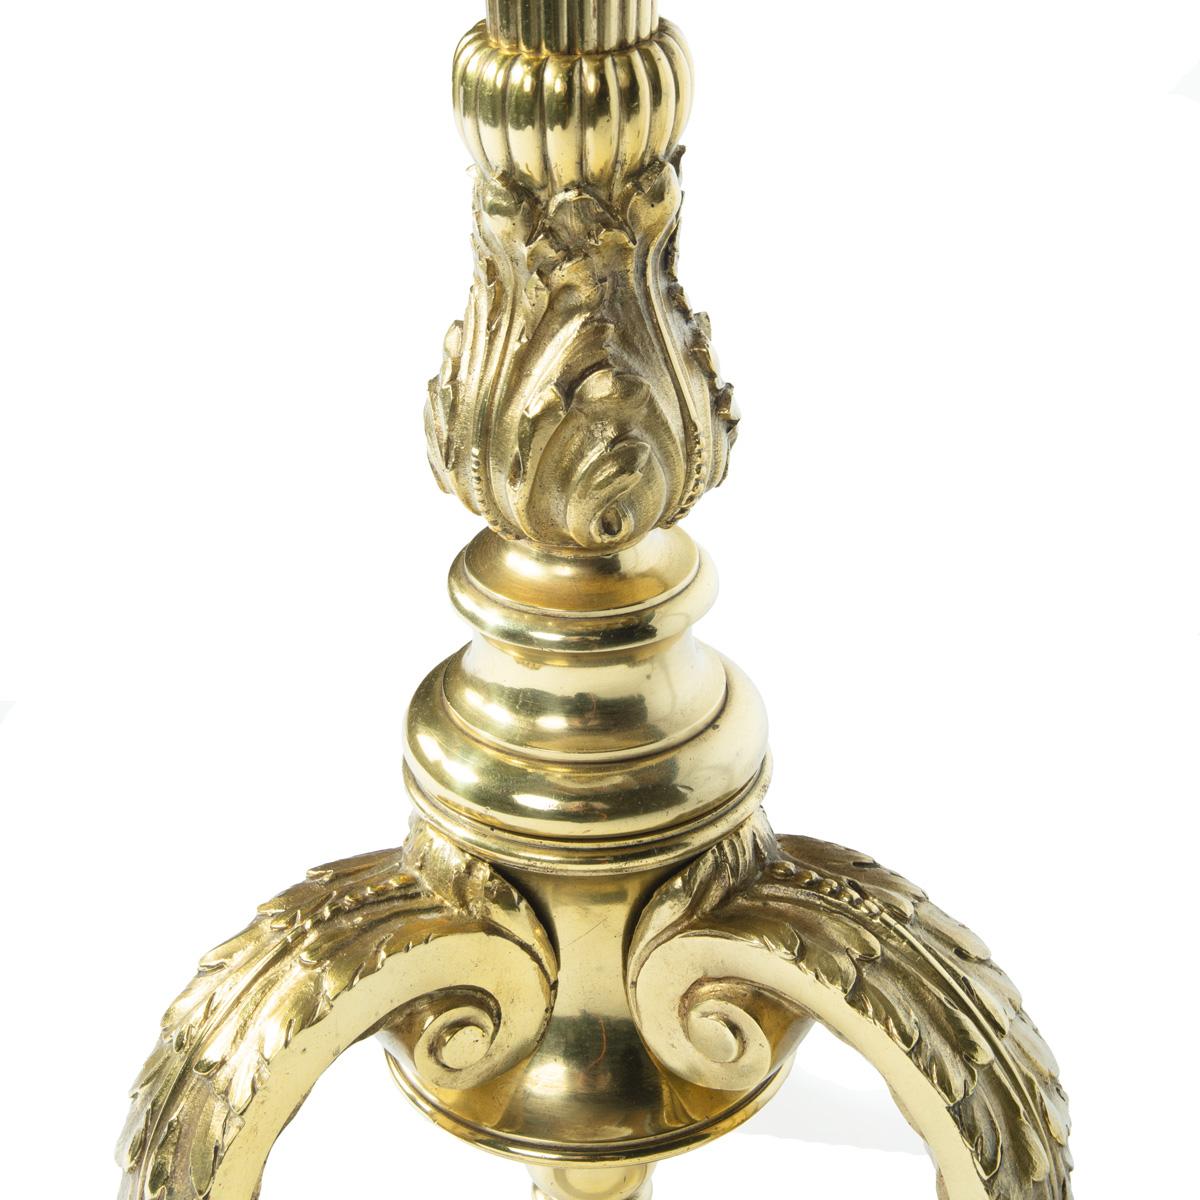 19th Century A pair of particularly fine quality French solid brass standard lamps